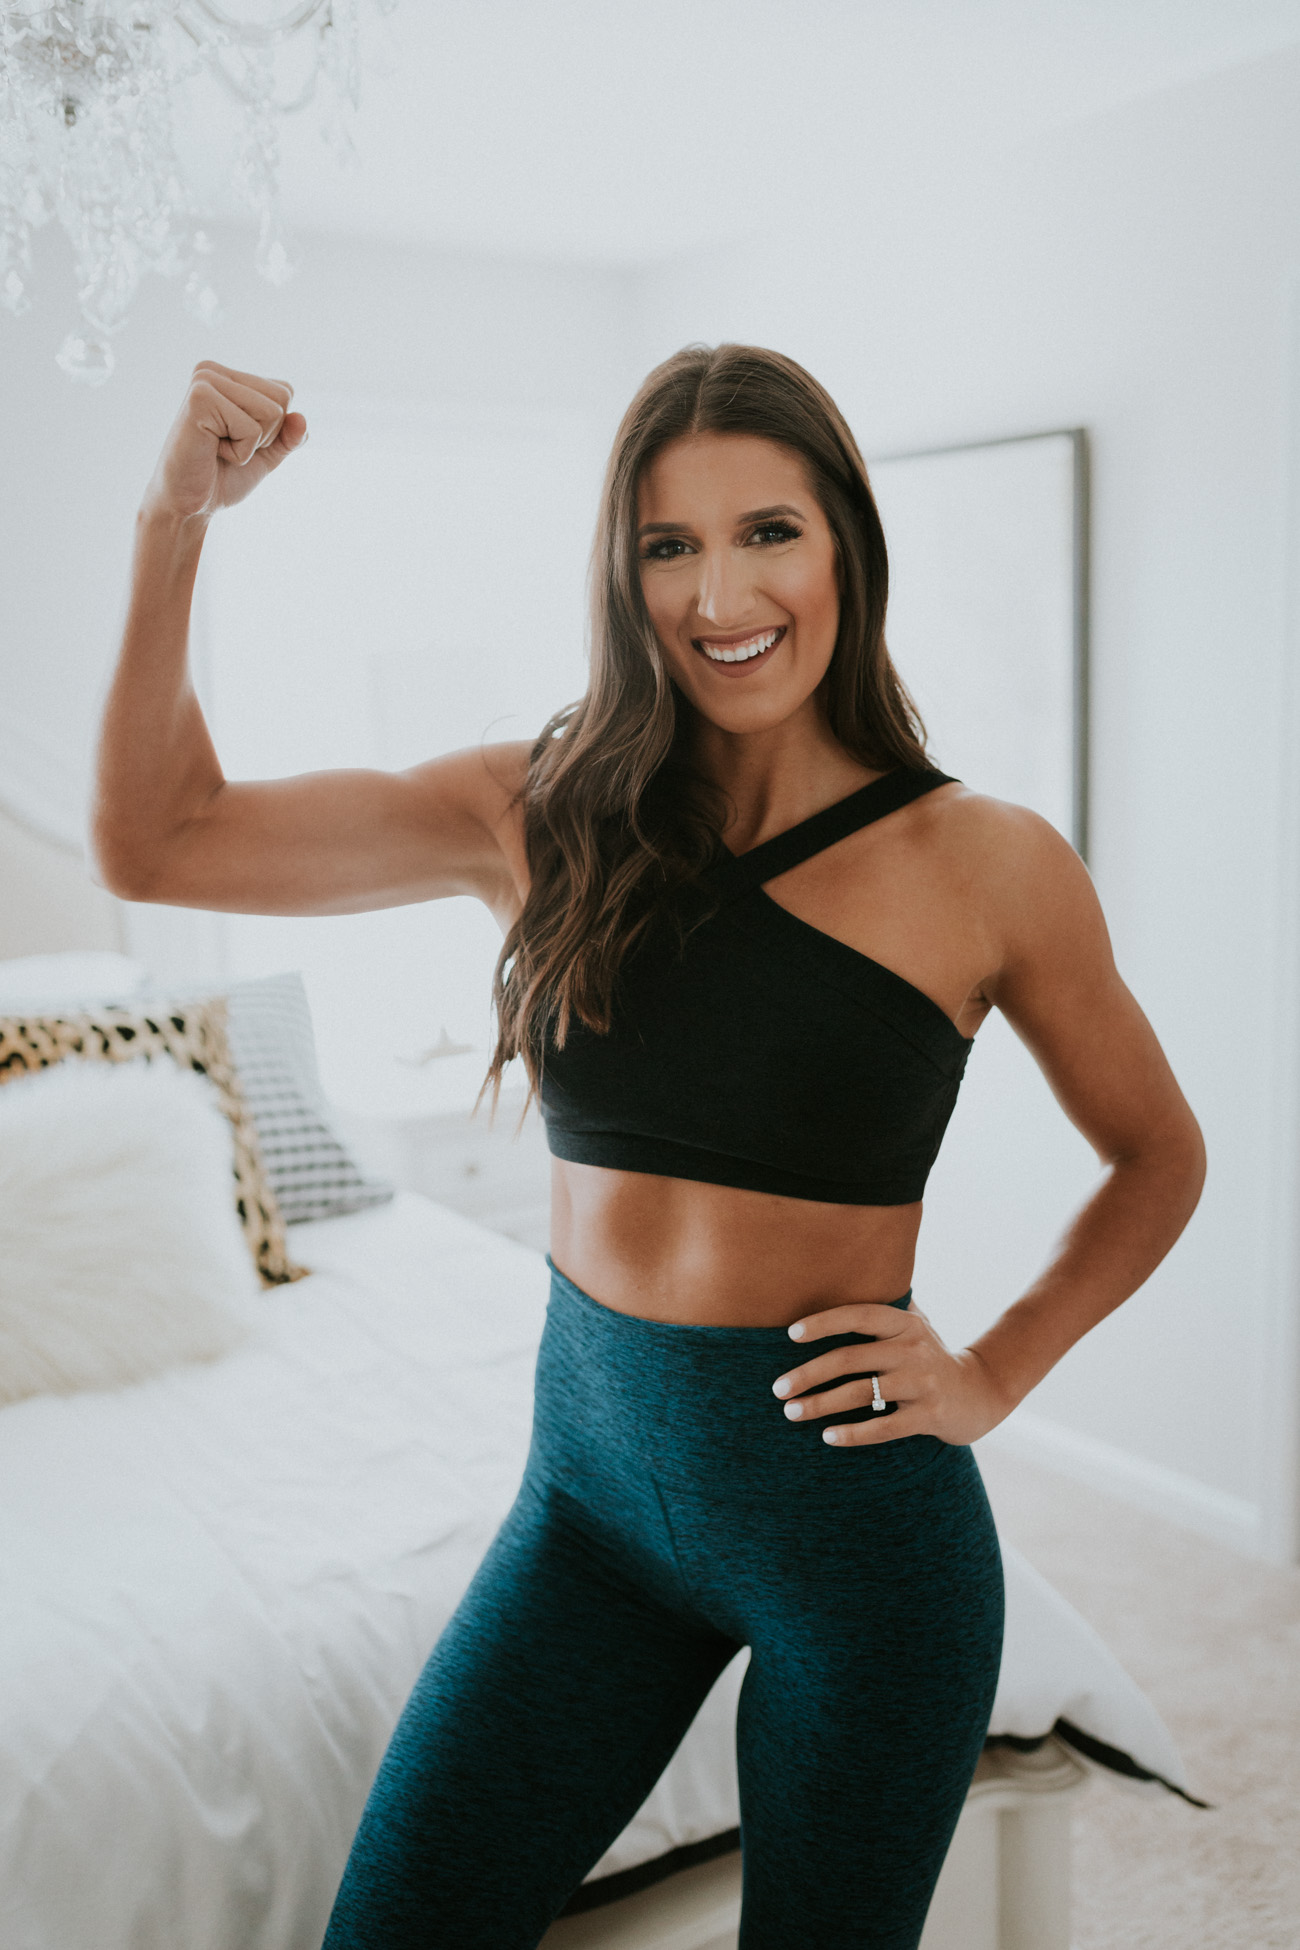 empowered media, jillian michaels app, fitness apps, fitness guides, workout apps, workout guides, best fitness apps, beyond yoga sports bra, beyond yoga spacedye leggings, fit with asd, fitwithasd, a southern drawl fitness // grace wainwright a southern drawl